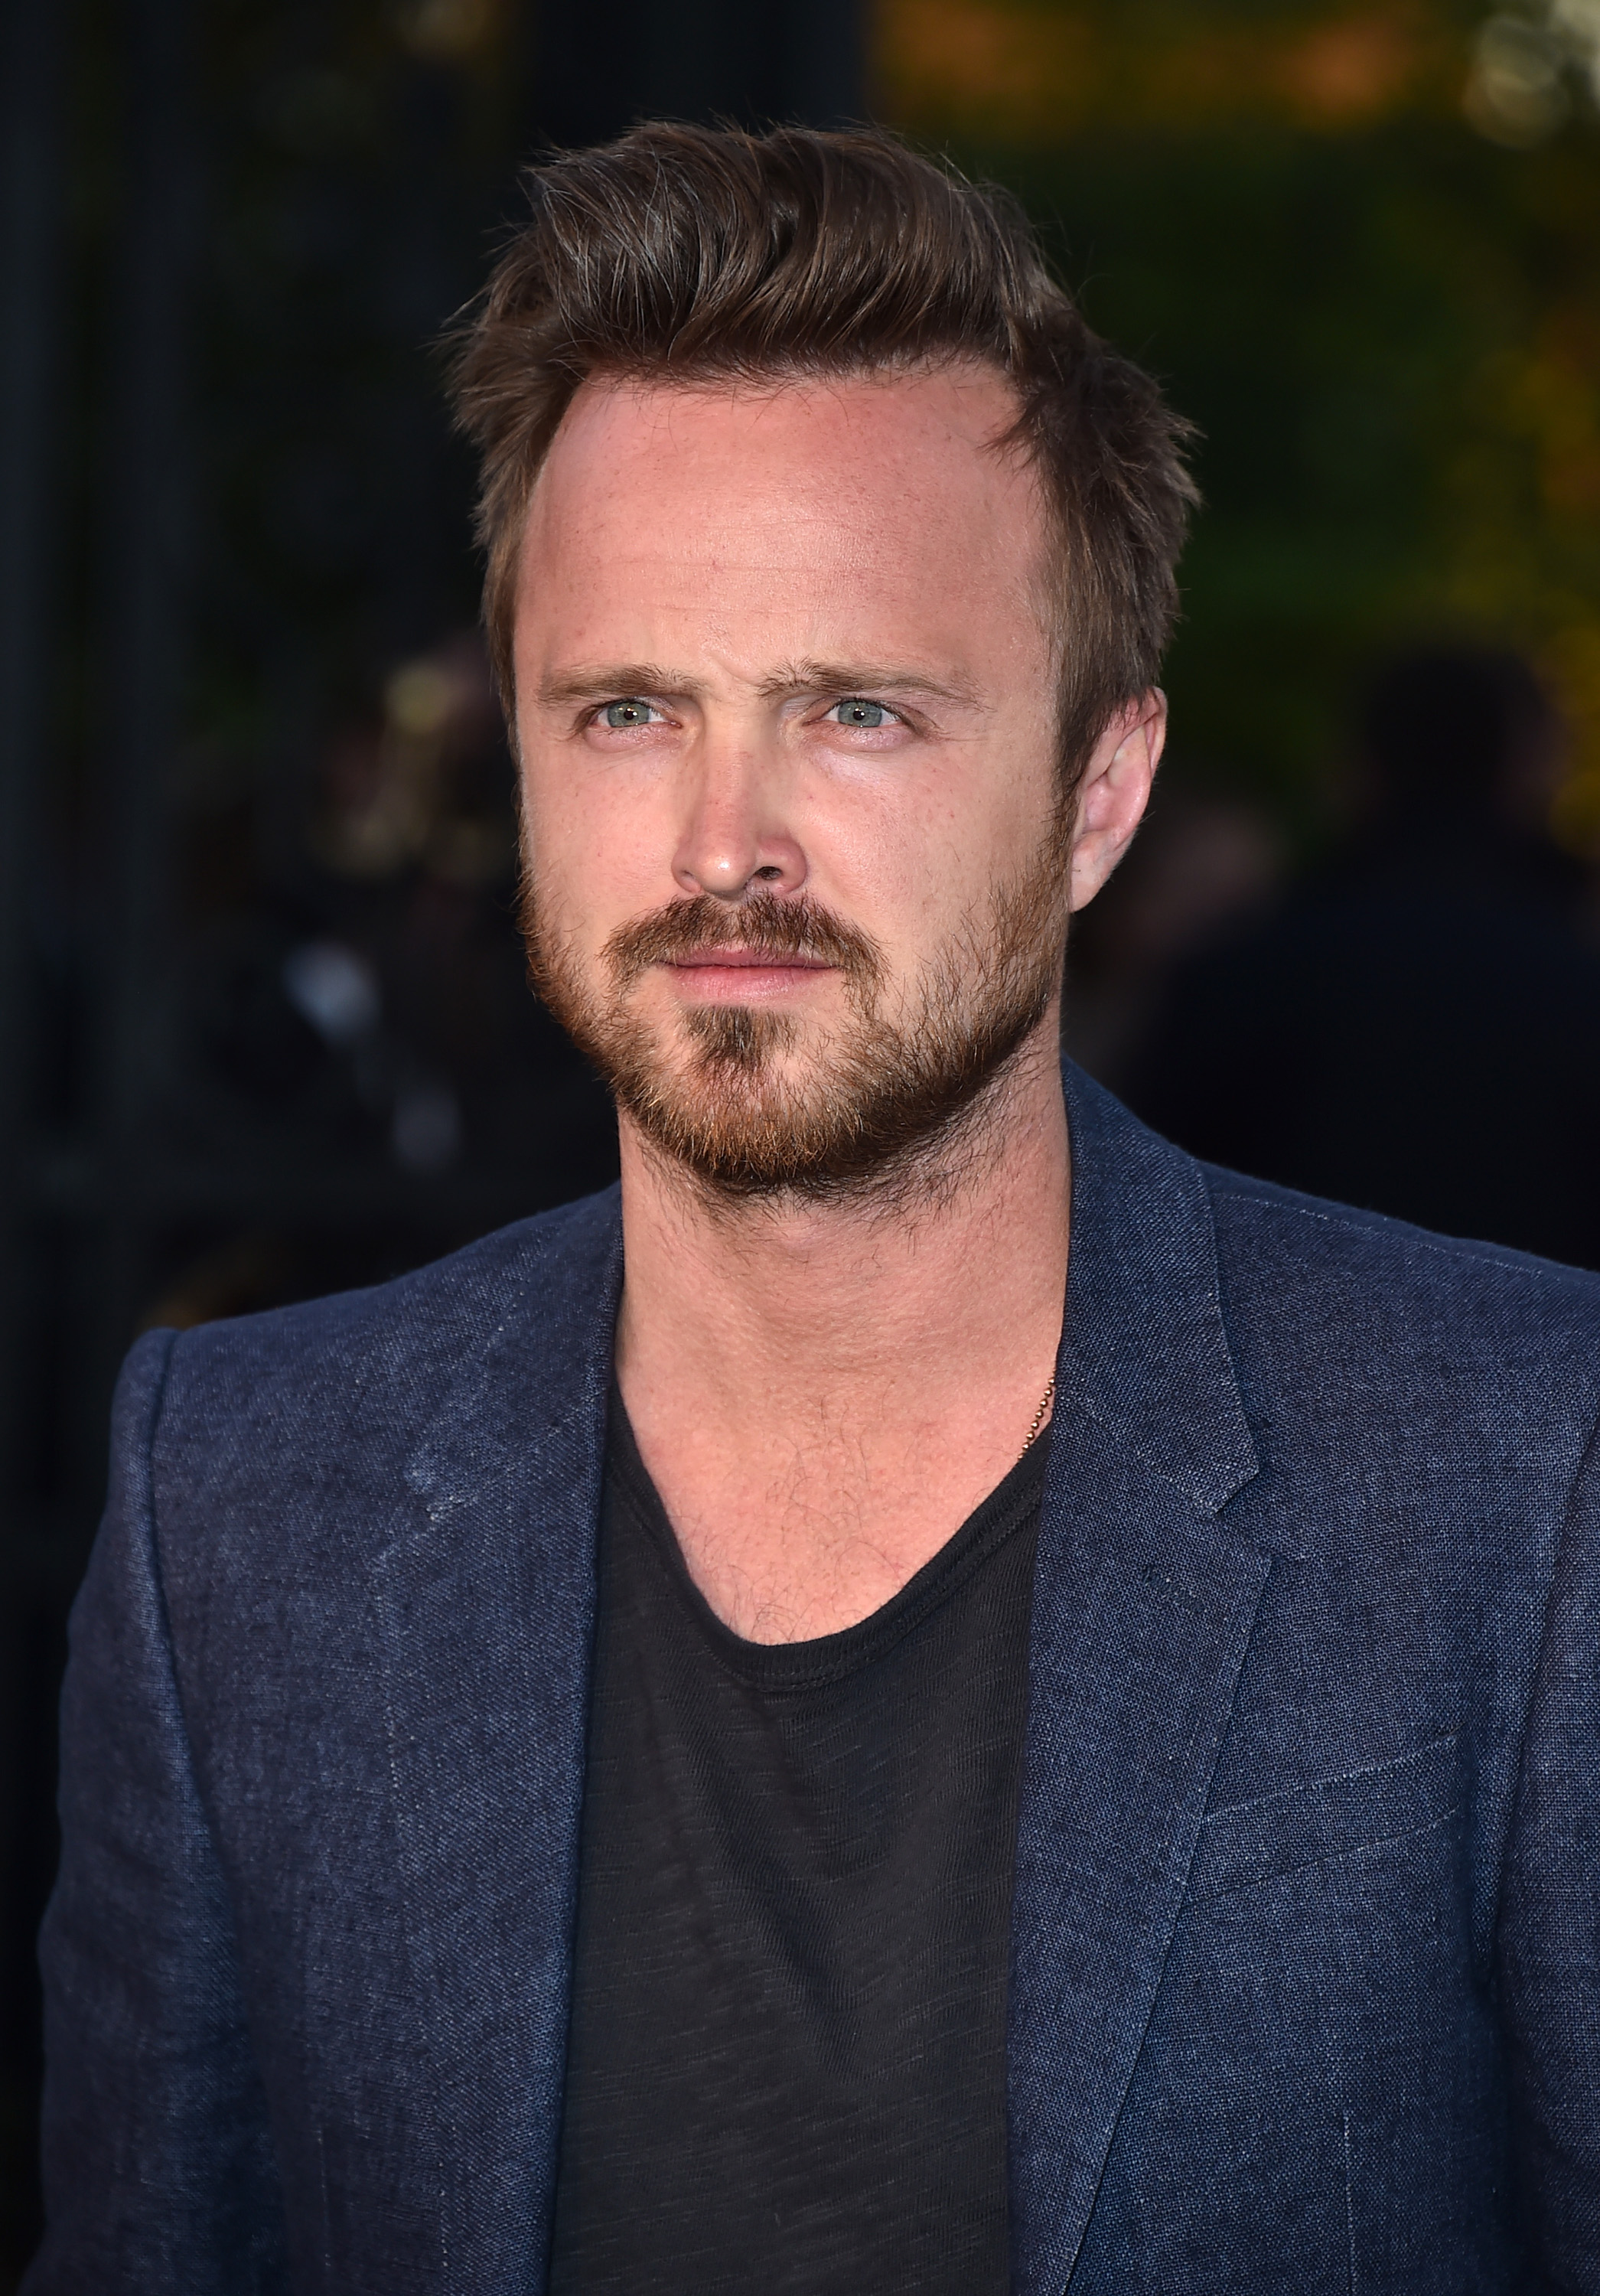 Aaron Paul at Burberry's "London in Los Angeles" event in London on April 16, 2015.